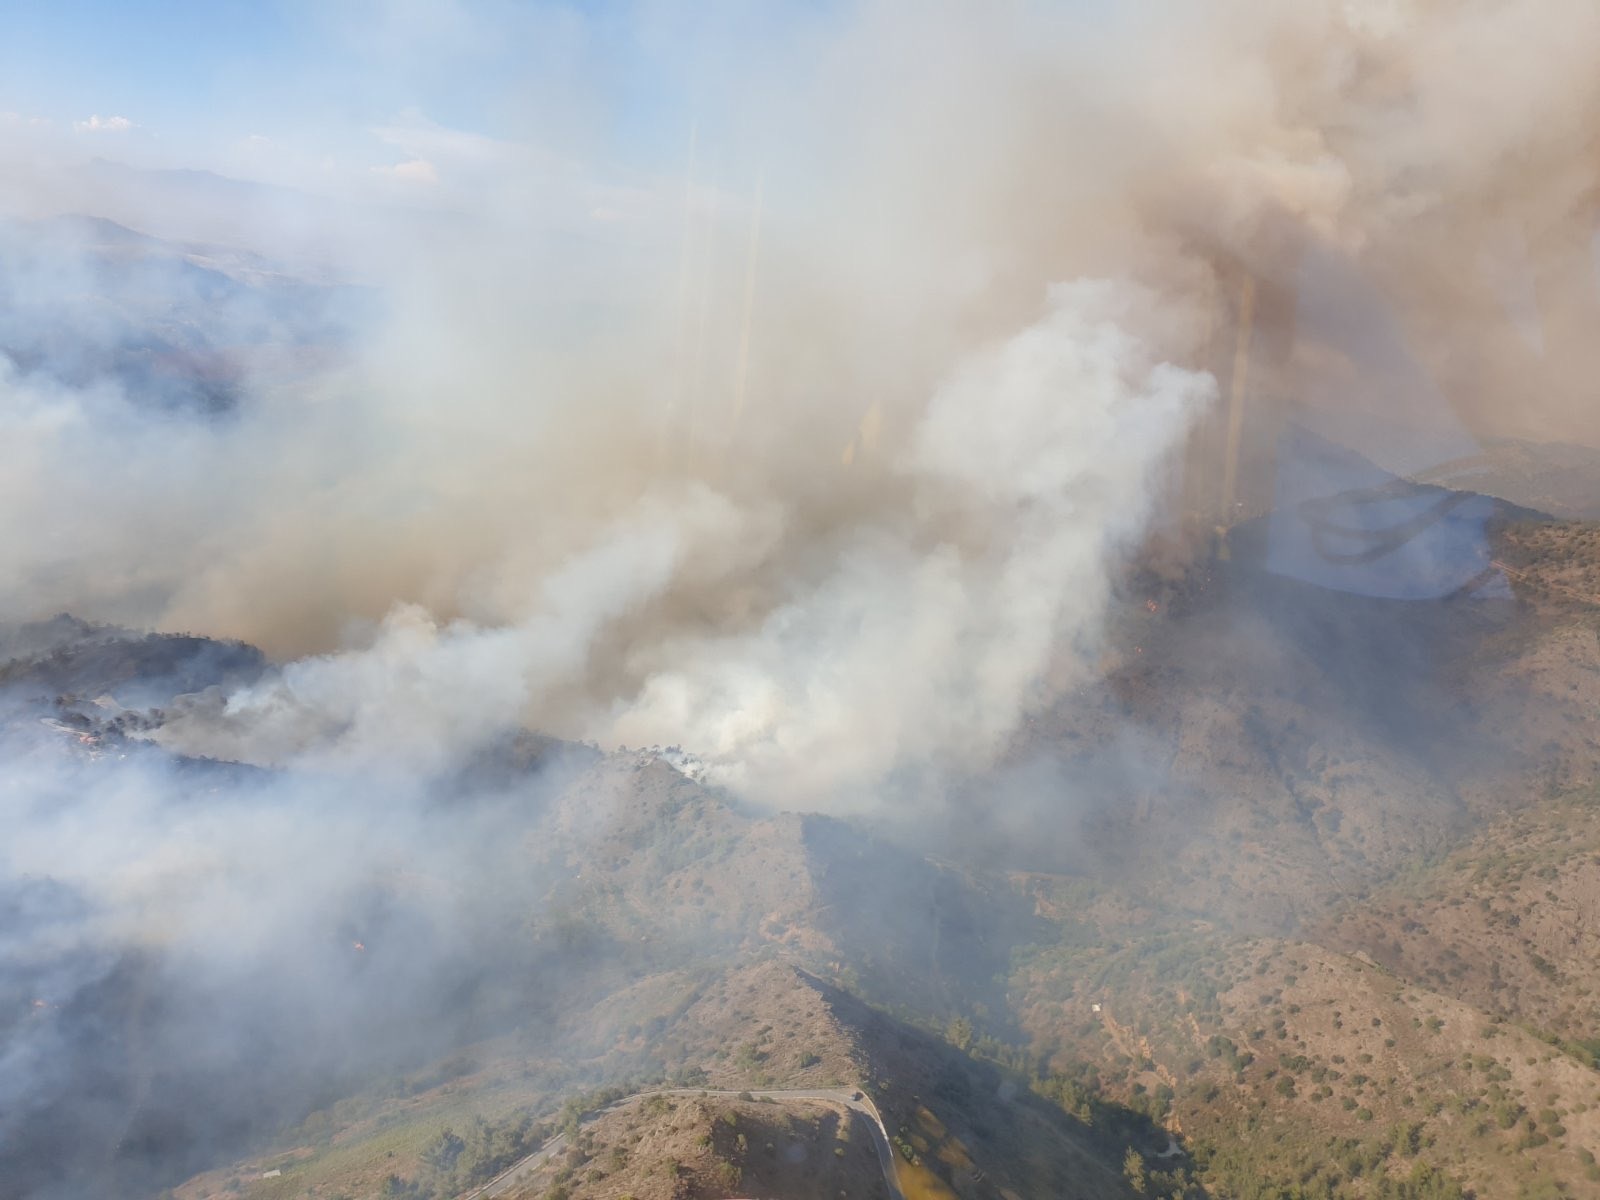 Fire brigade and EAC at odds over cause of Farmakas fire